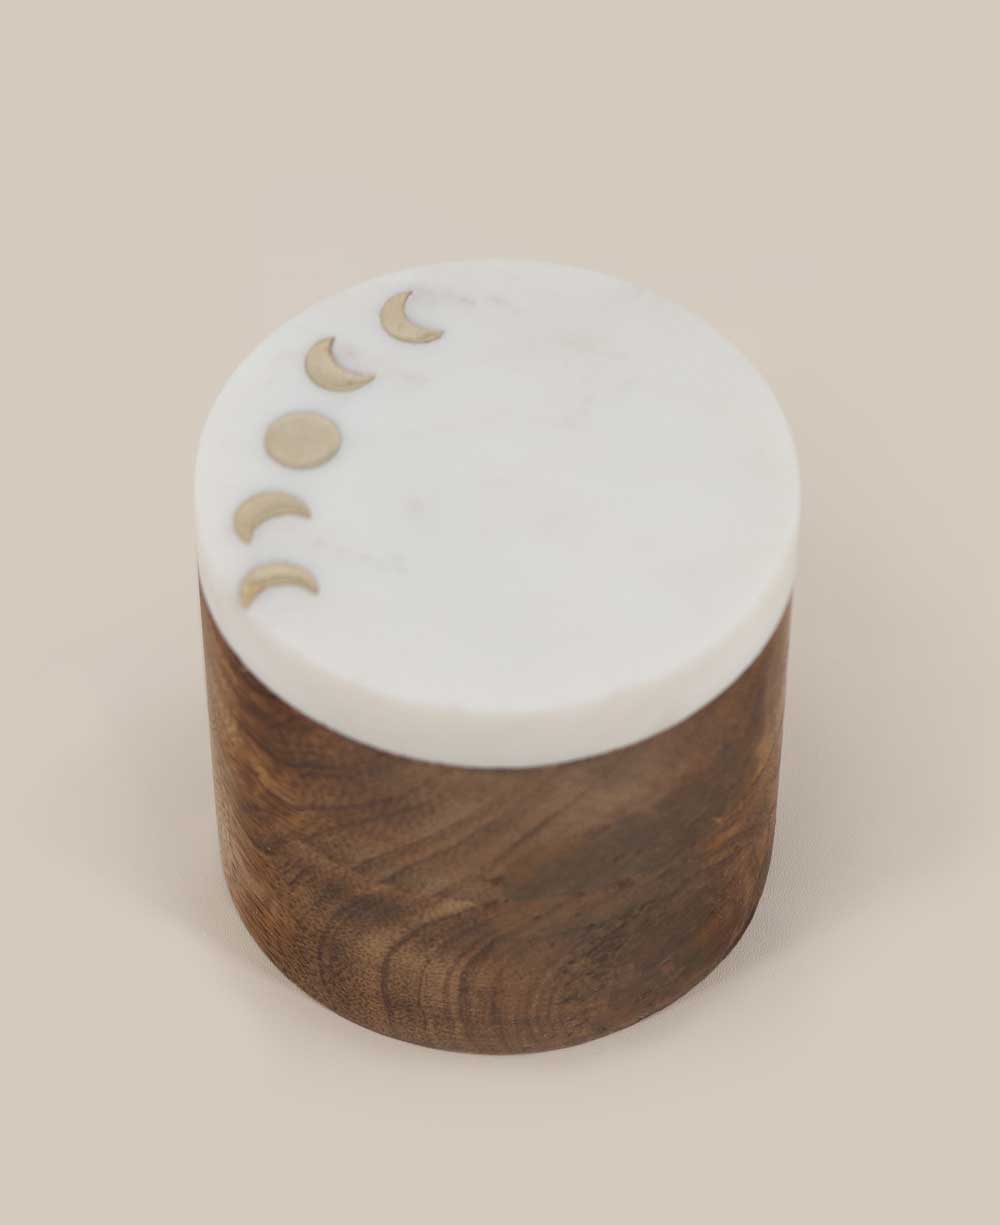 Fairtrade Marble Lid Celestial Wood Small Box - Gift Boxes & Tins